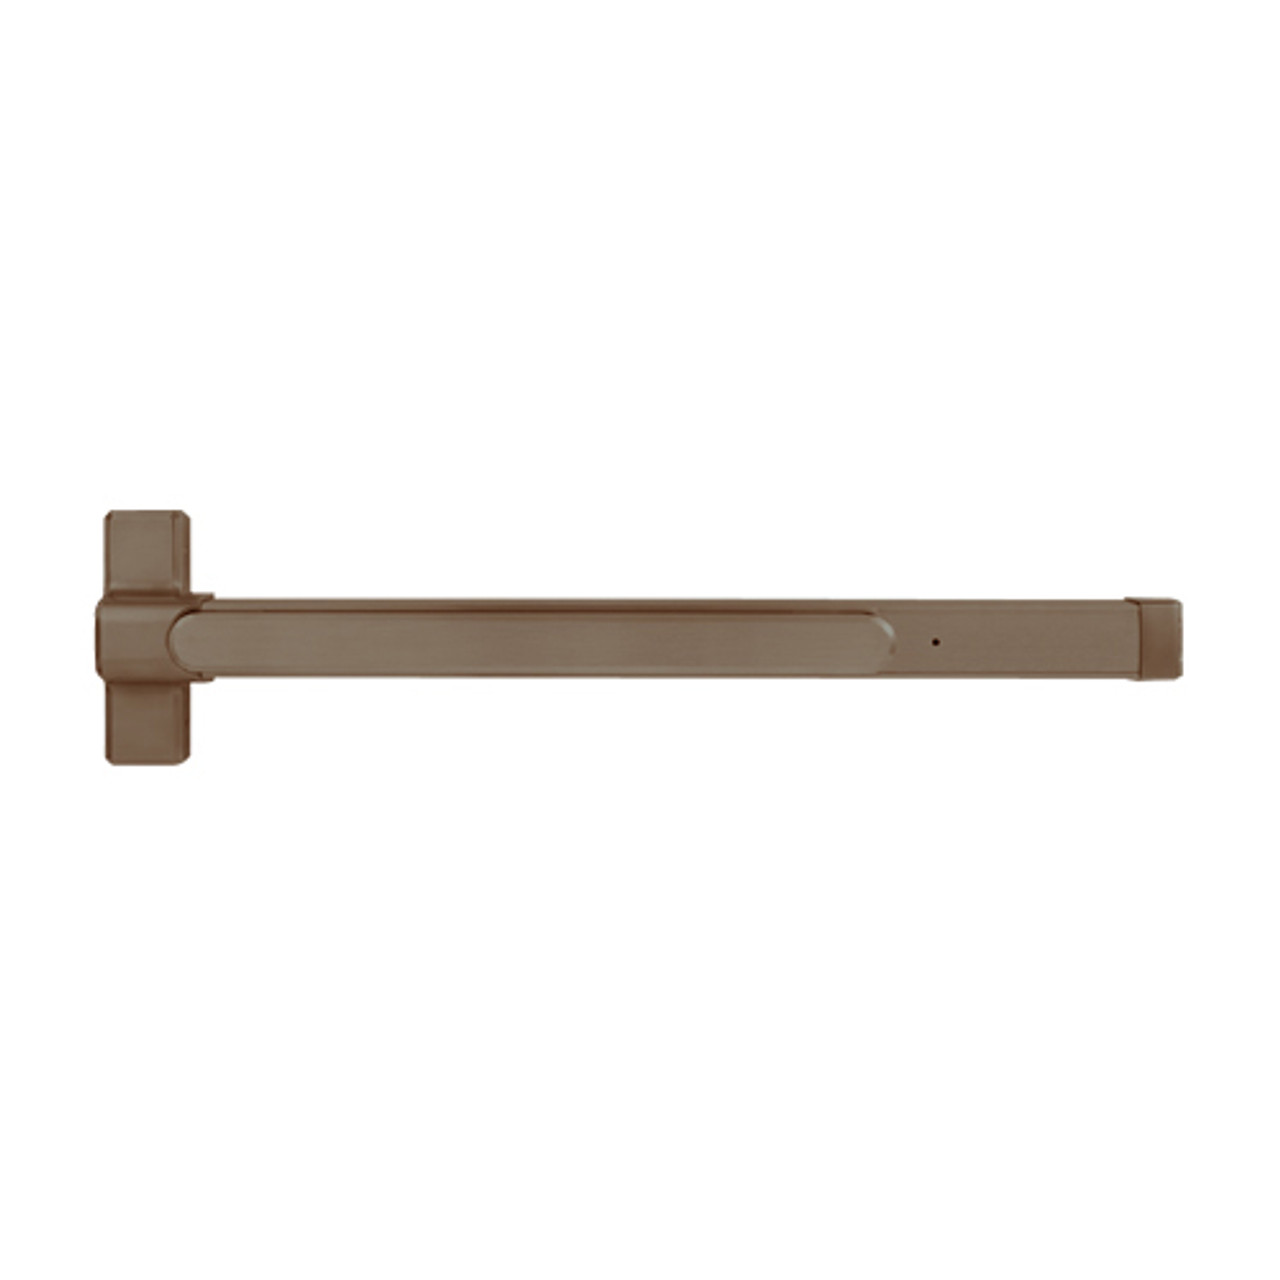 QED117EDX-36-8-313AN Stanley QED100 Series Heavy Duty Surface Vertical Rod Hex Dog Exit Device in Anodized Duranodic Bronze Finish